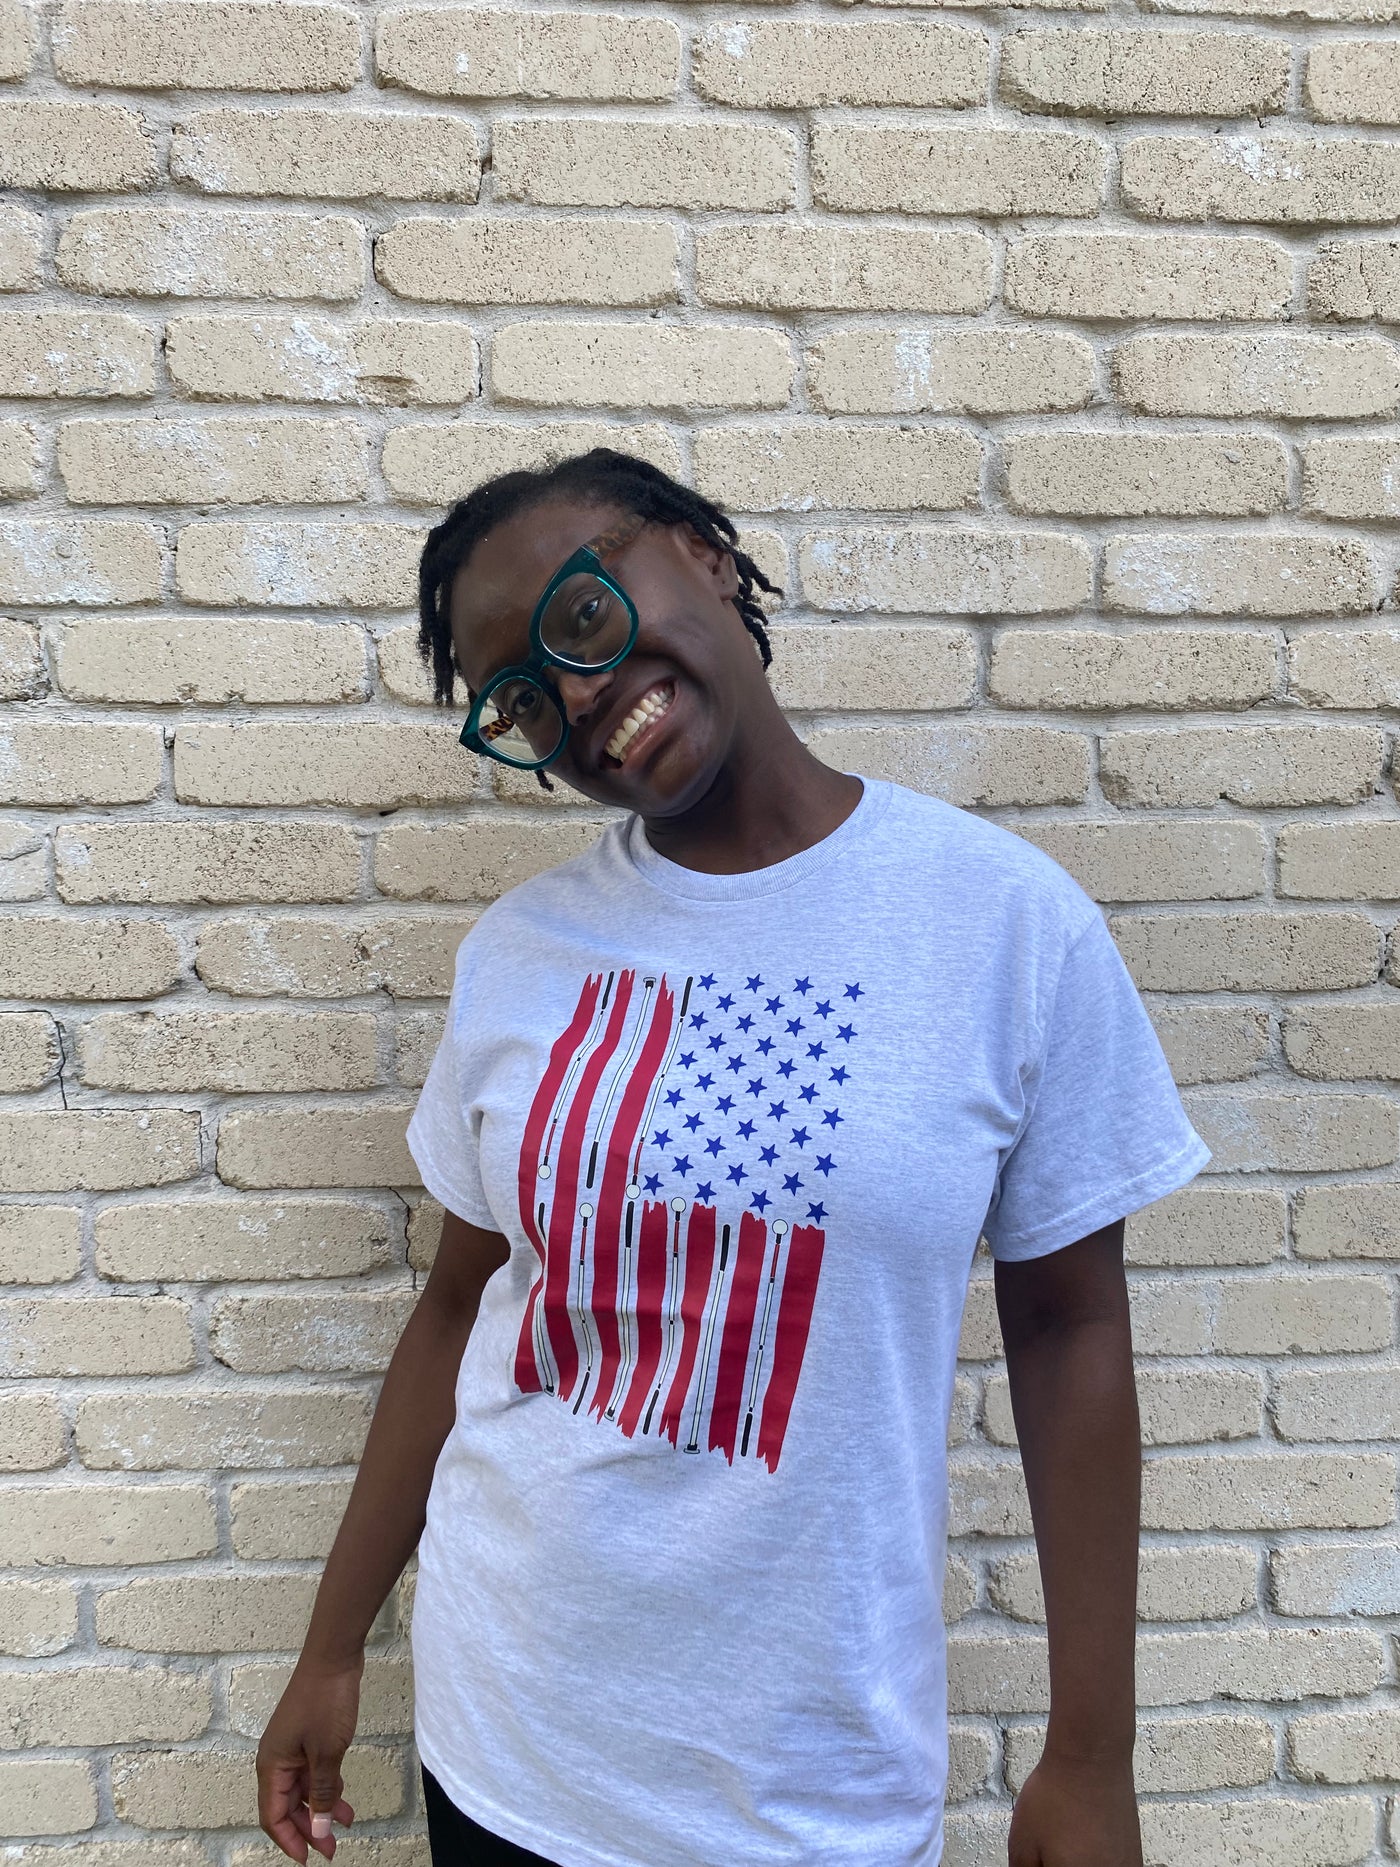 Cyndi is wearing a light grey t-shirt with a large print of a flag hanging downward is on the chest. The red stripes resemble hand drawn stripes. White canes take the place of white stripes. The 50 stars are blue with no background.